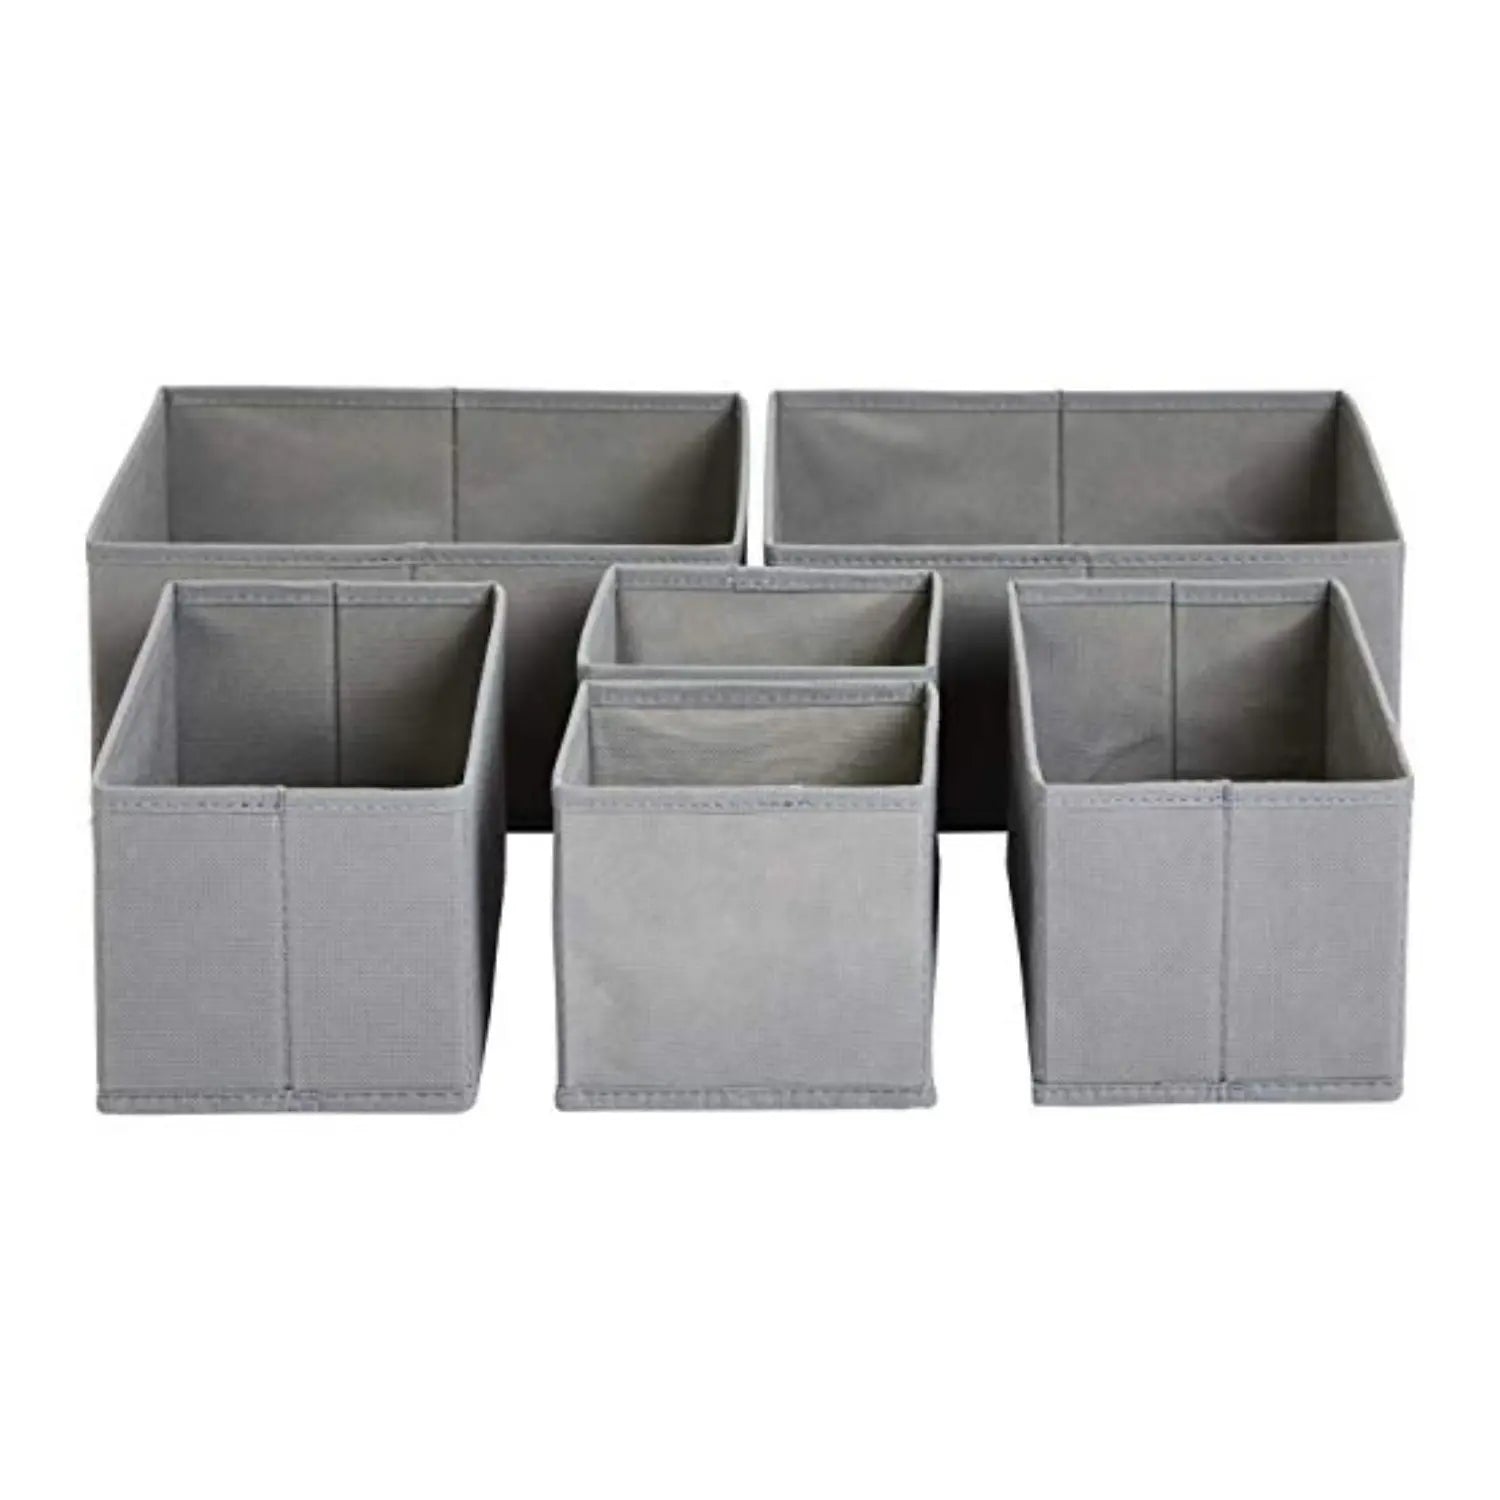 Collapsable Clothes Drawer Organisers